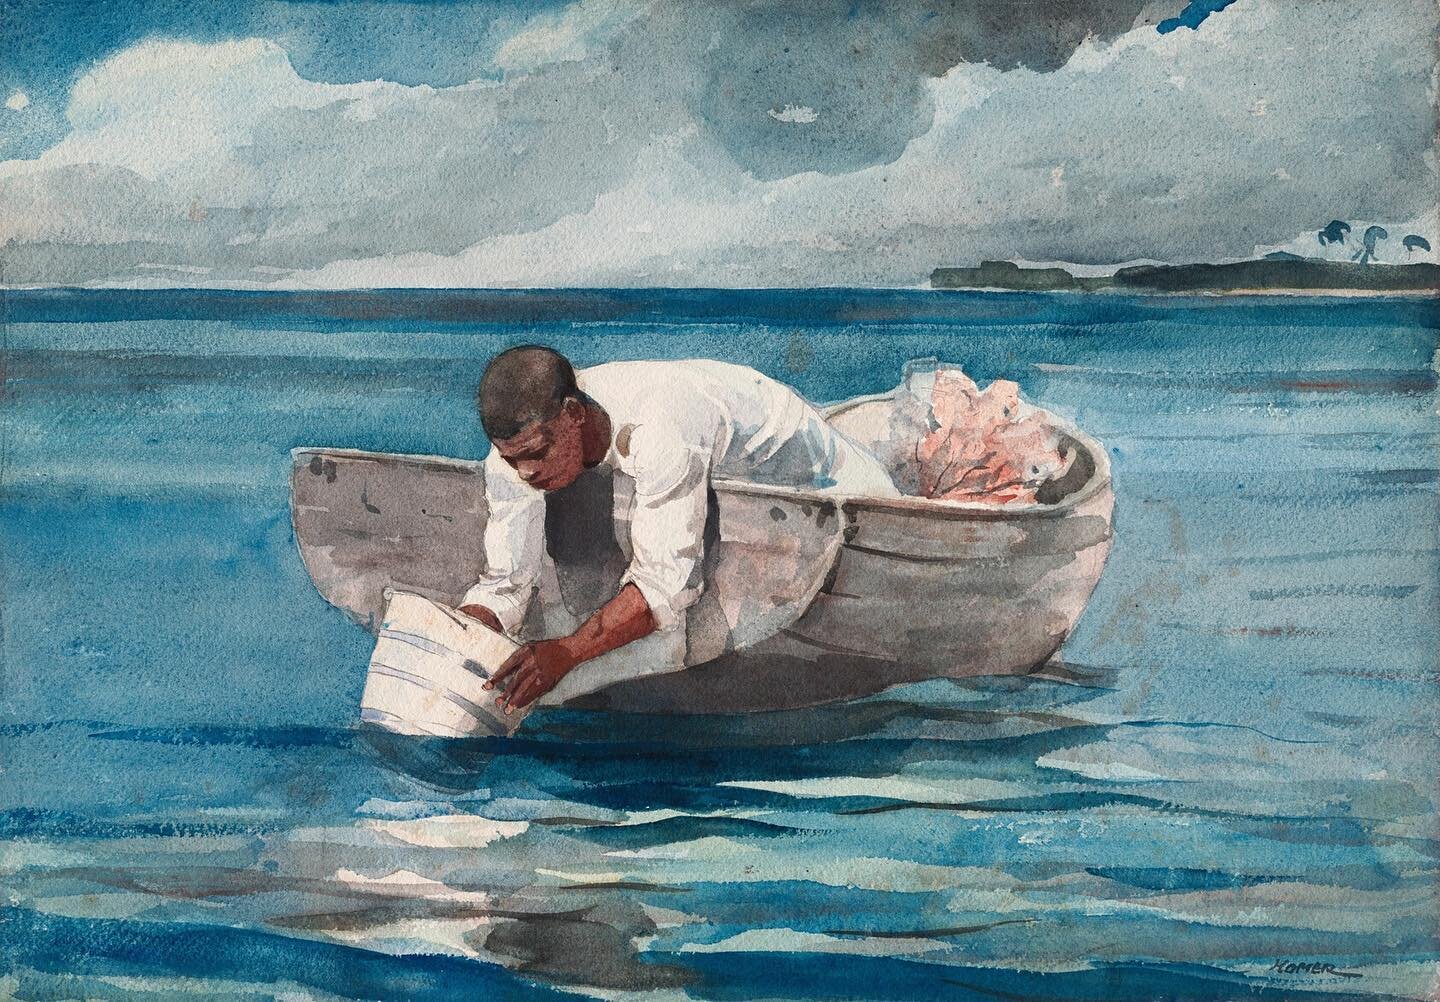 &quot;The Water Fan&quot;, (1898-1899), Winslow Homer (American, 1836-1910), Watercolor on paper. Source: Art Institute of Chicago. ⁠
⁠
***⁠
⁠
&quot;The Water Fan&quot; depicts a young man intently searching for coral using a glass-bottomed bucket. ⁠